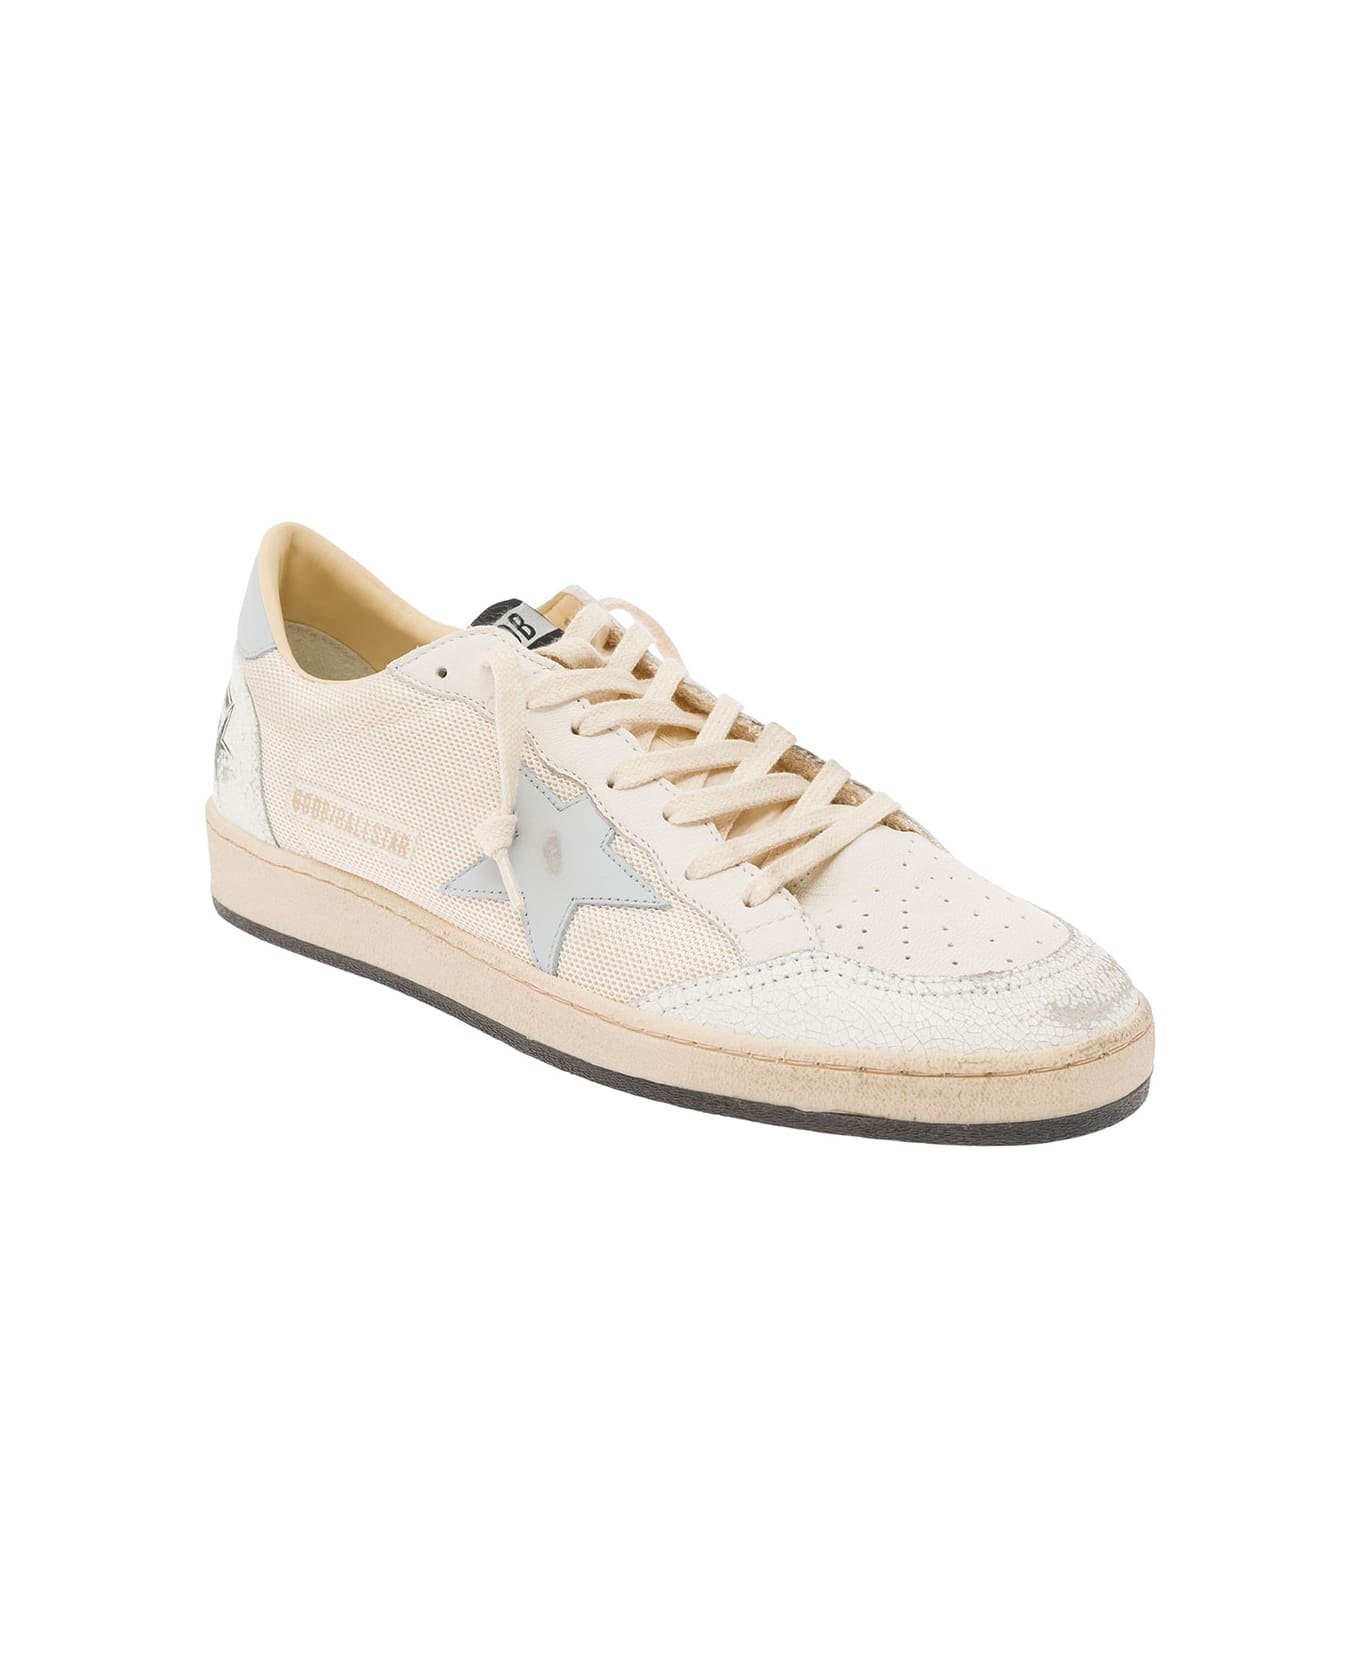 Golden Goose Ball Star Net Upper Crack Leather Toe And Spur Nylon Tongue Leather Star And Heel - Beige